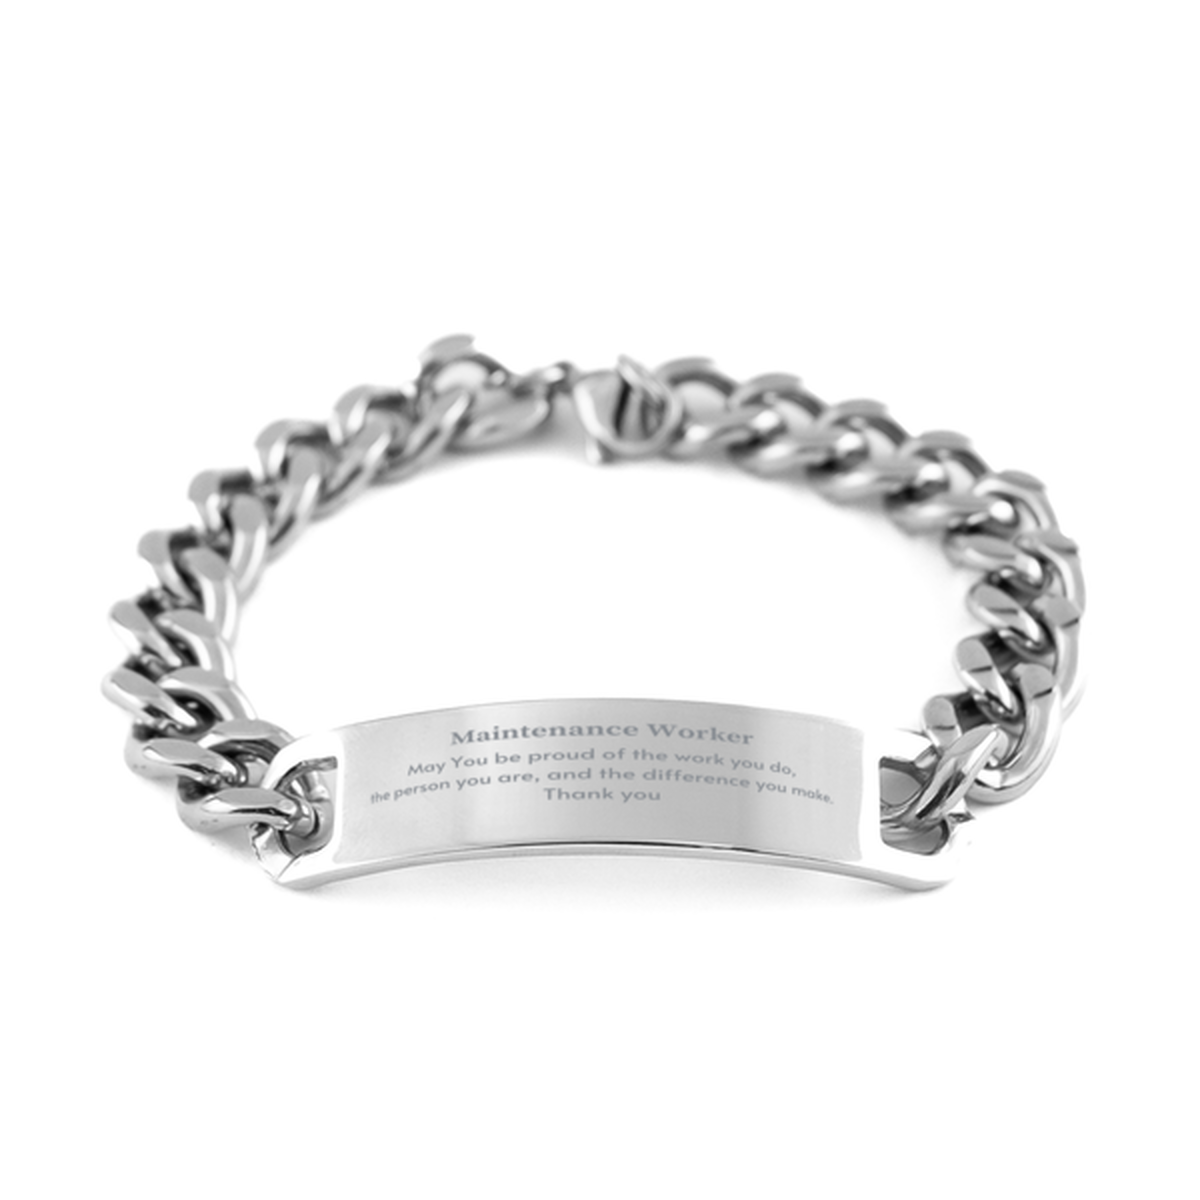 Heartwarming Cuban Chain Stainless Steel Bracelet Retirement Coworkers Gifts for Maintenance Worker, Maintenance Worker May You be proud of the work you do, the person you are Gifts for Boss Men Women Friends